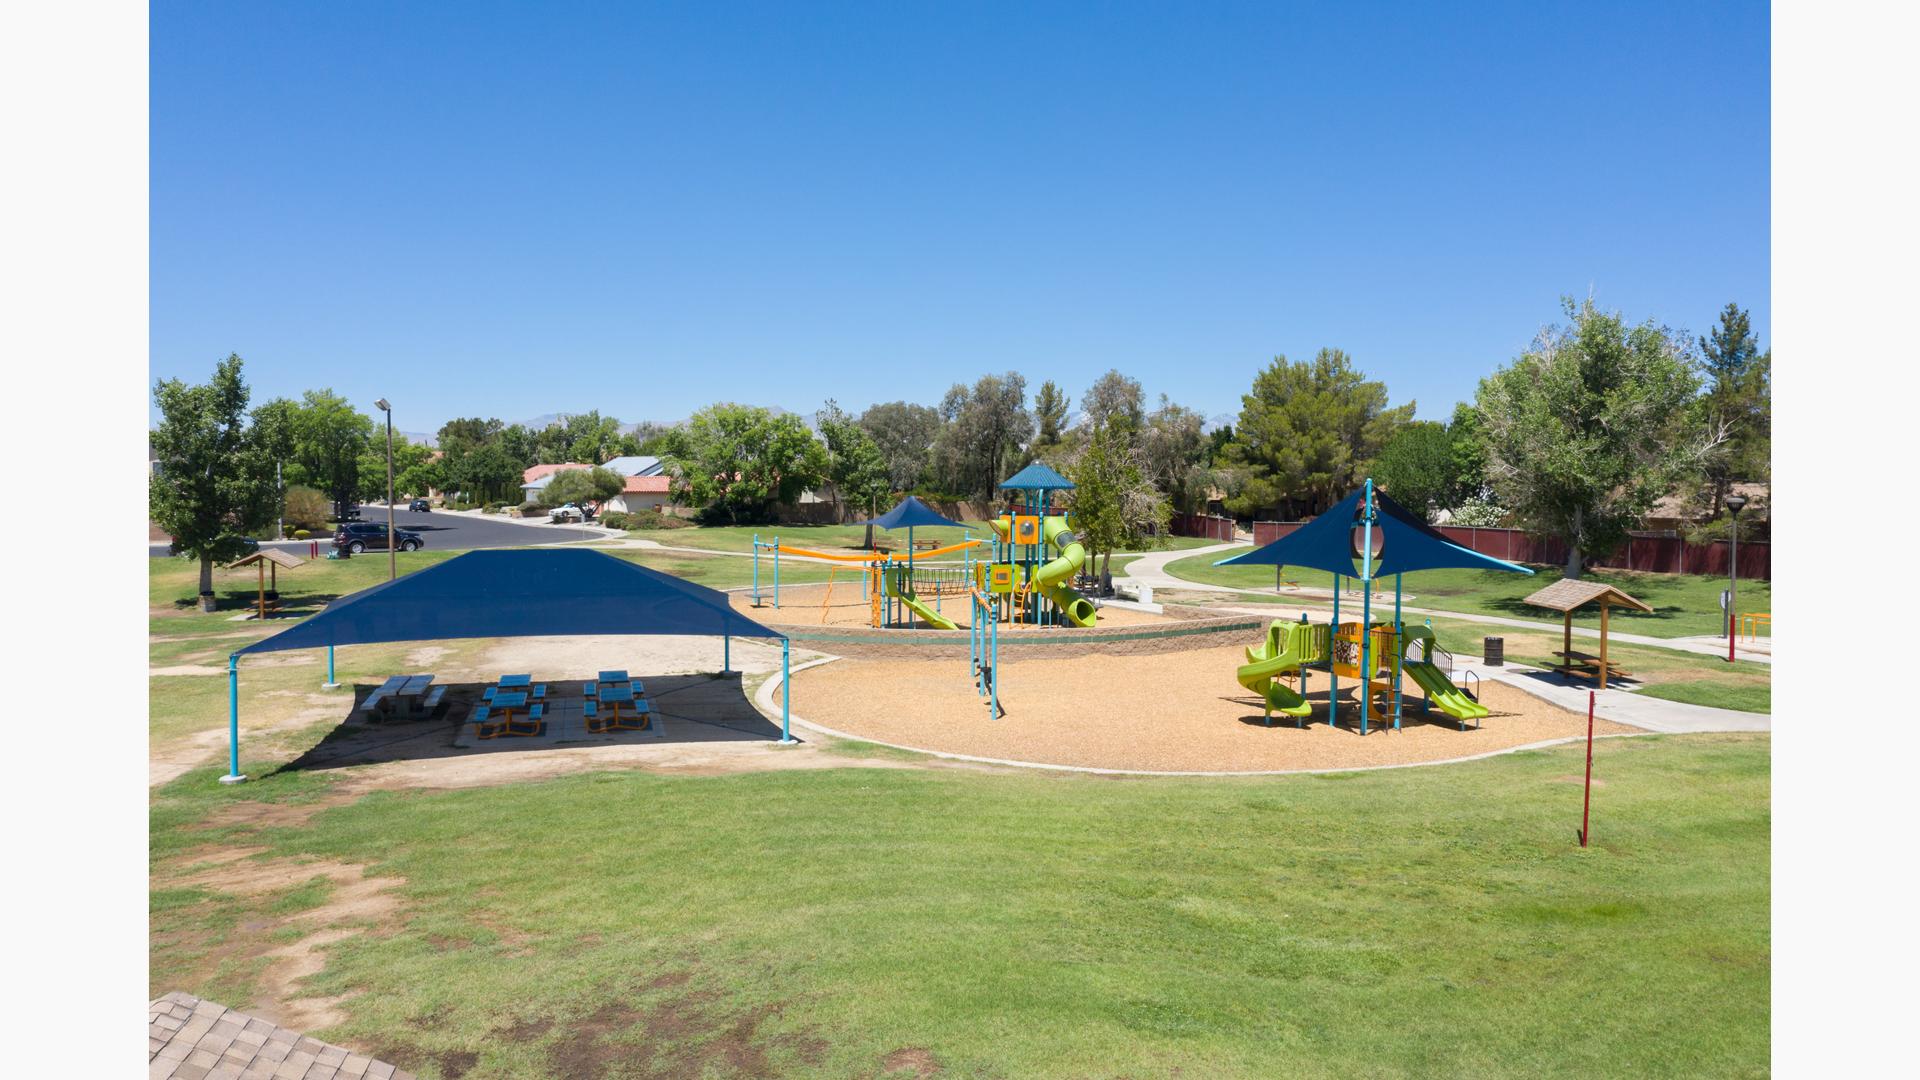 Nestled in a quaint neighborhood in Ridgecrest, CA, Pearson Park comes with two main structures for kids to play on. Along with swings and a Zipline, as well as picnic tables covered in SkyWays shade.